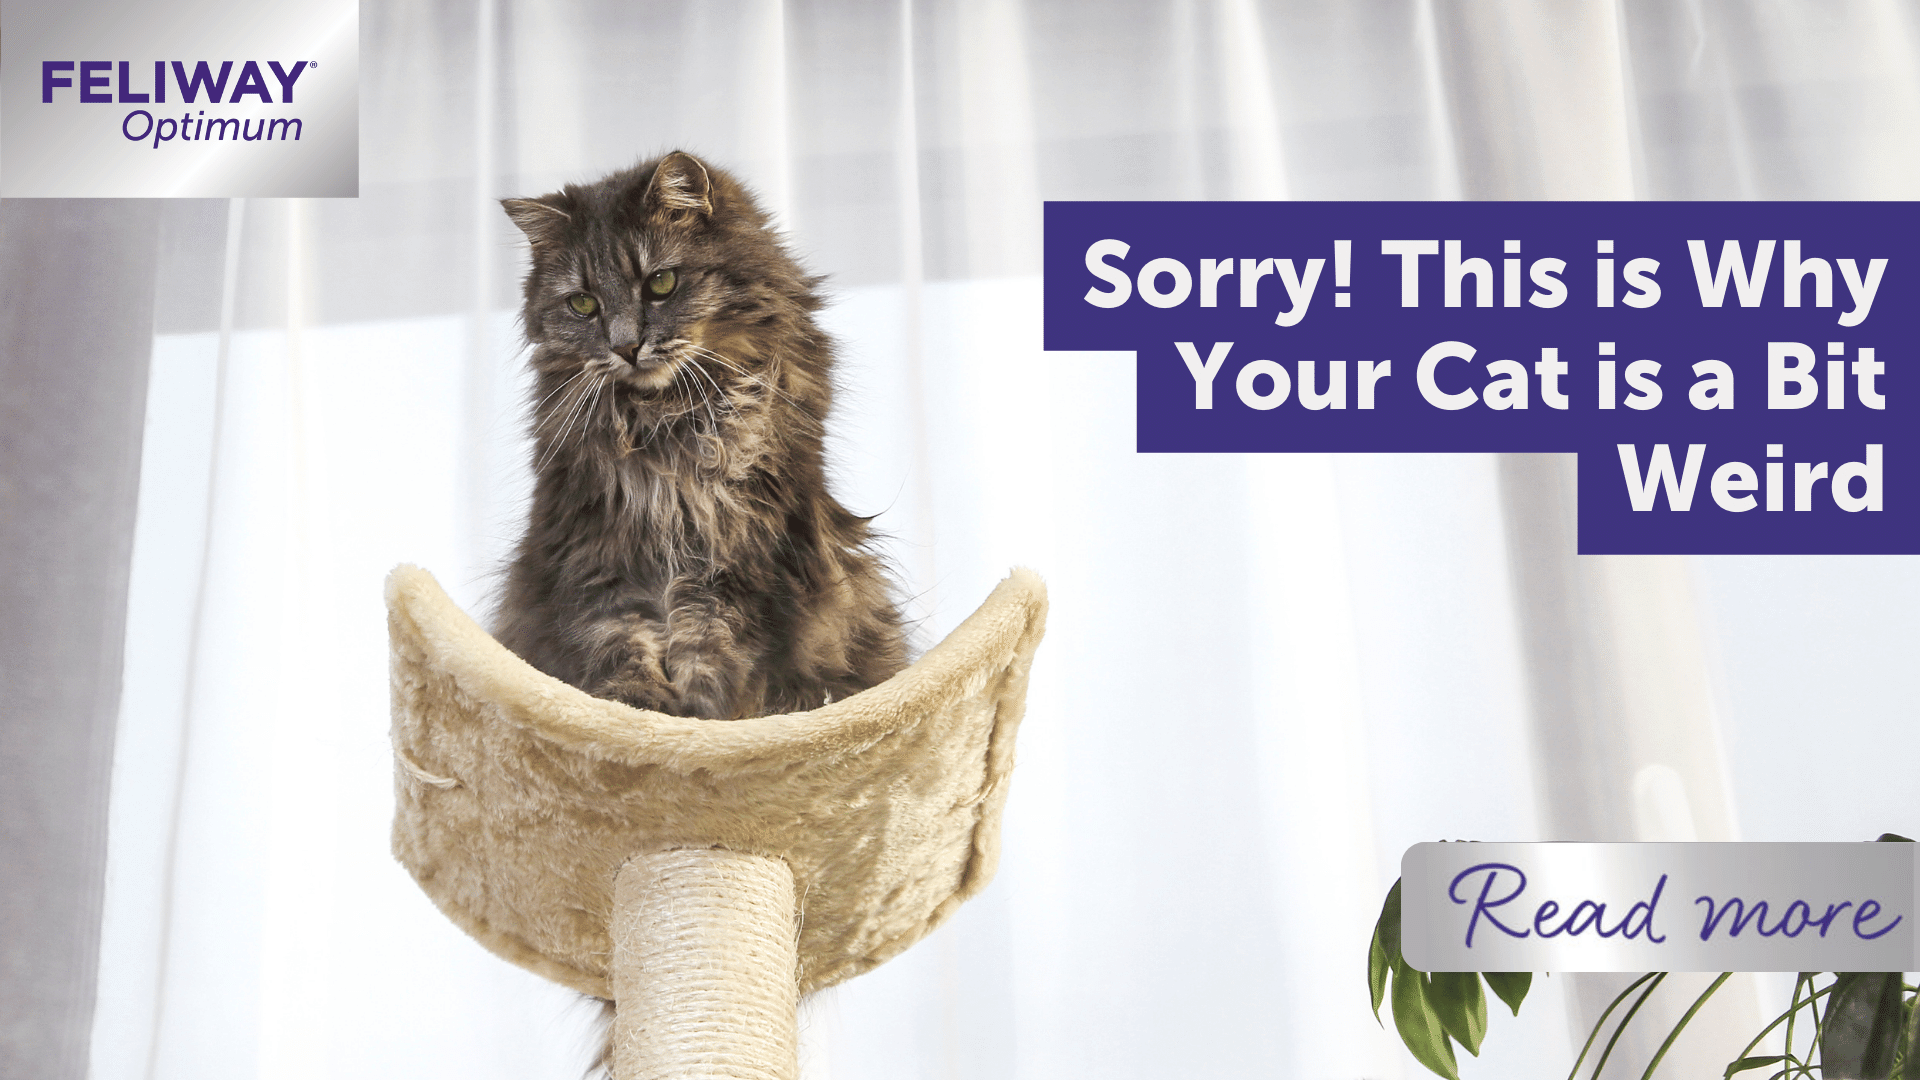 Sorry! This is why your cat is a bit weird